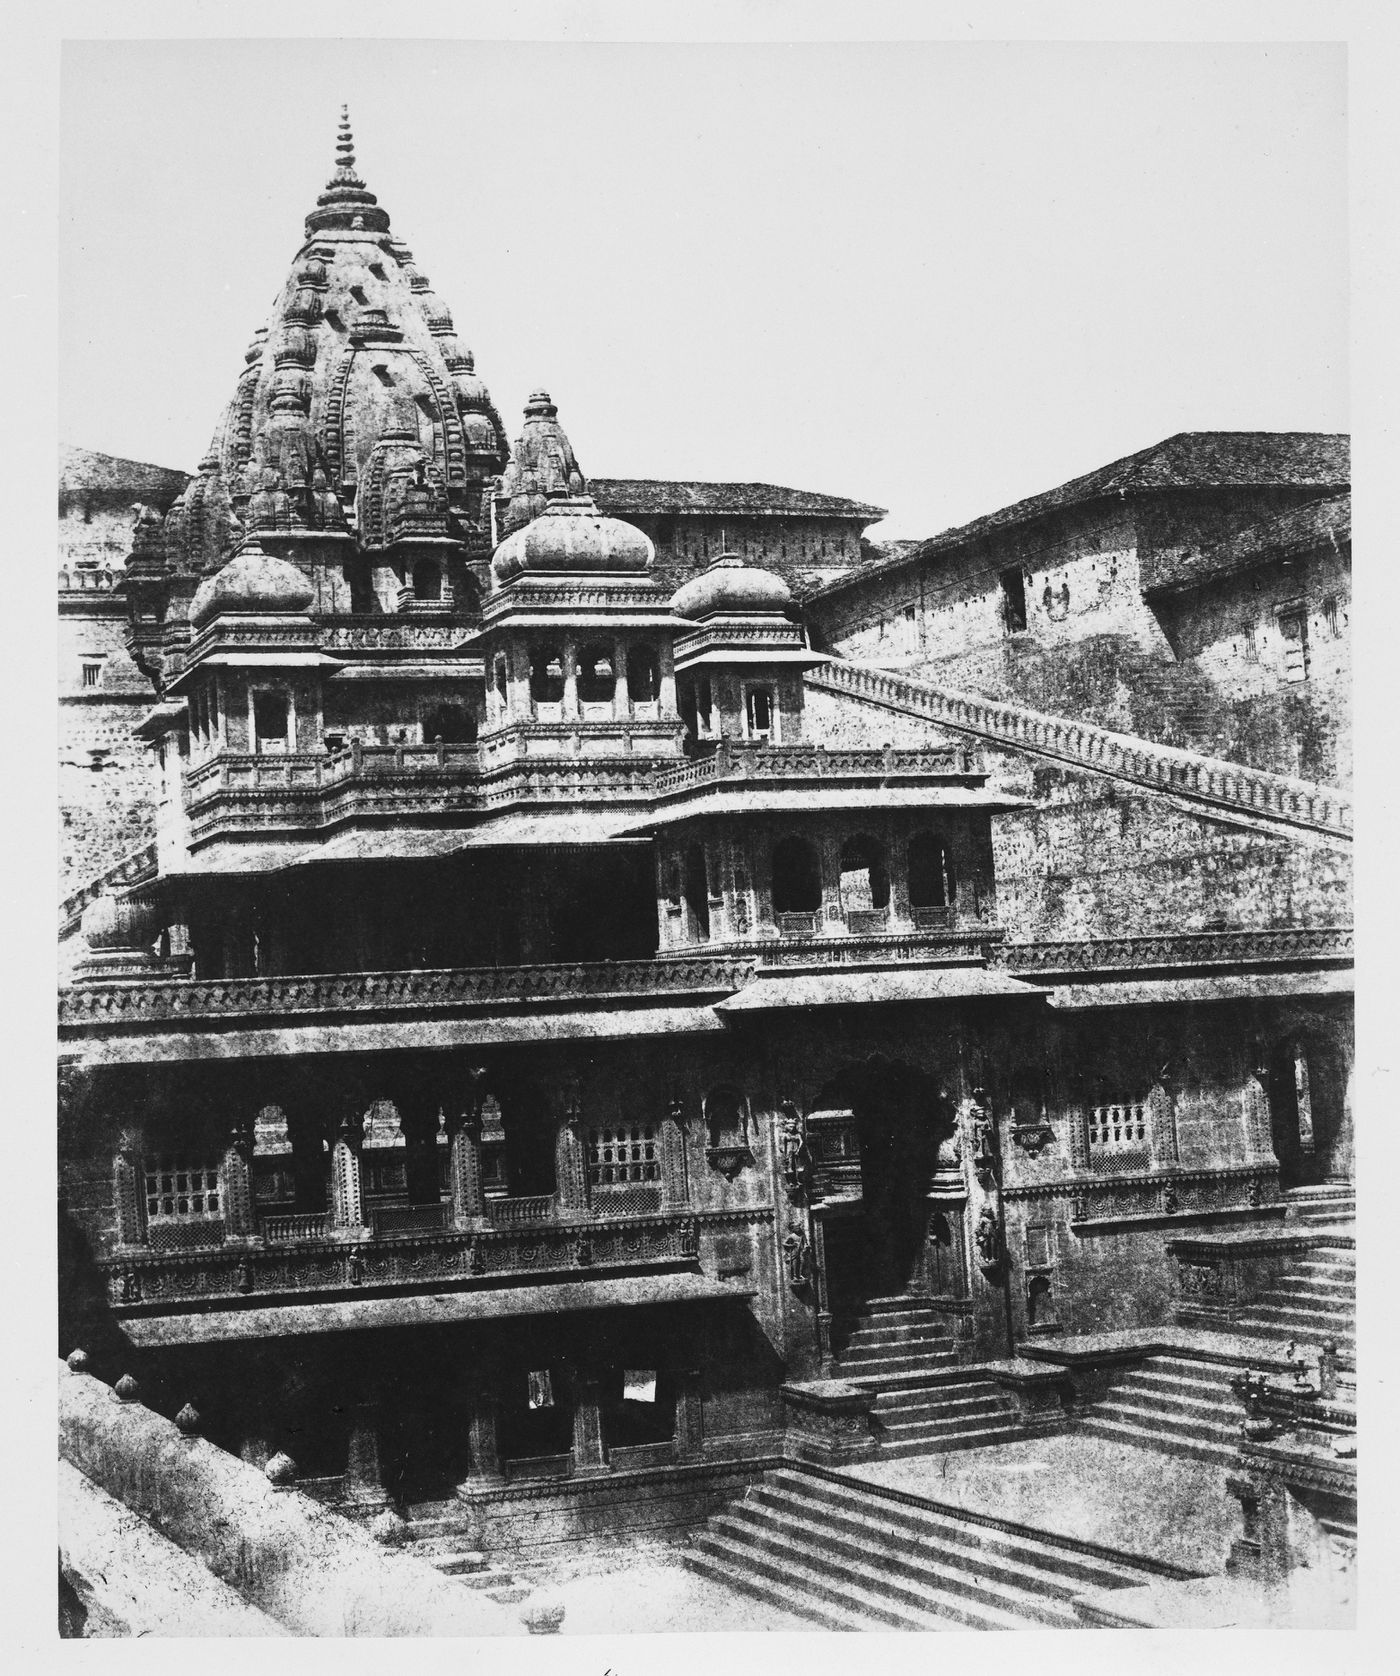 View of a temple, Mundleysir [?], India